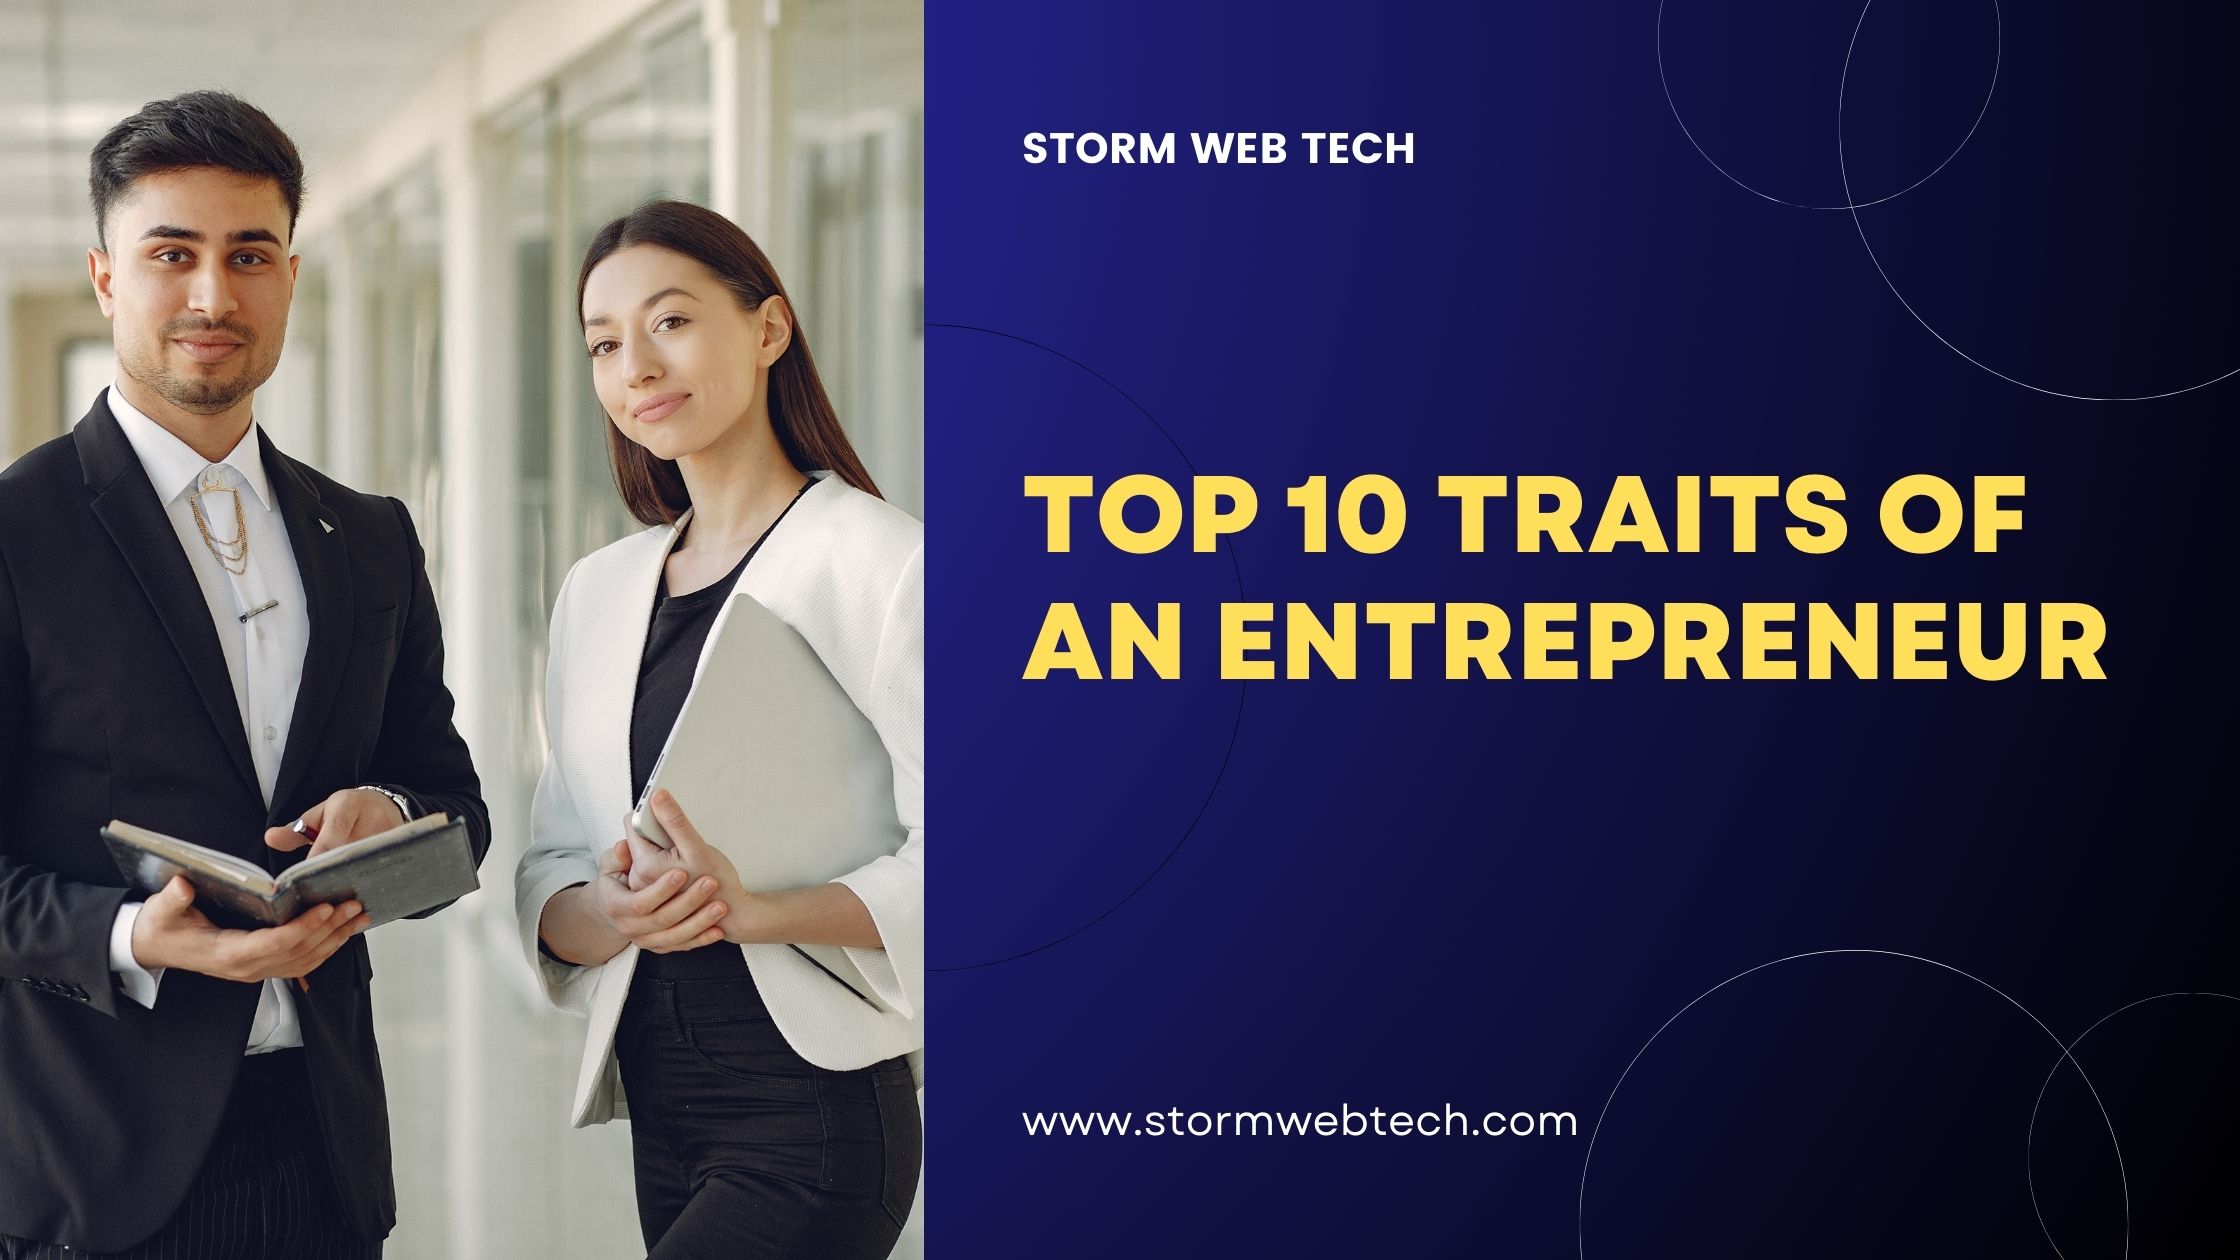 Entrepreneurs are described as being visionary, innovative, risk-taking. But what are the top 10 traits of an entrepreneur that make them successful